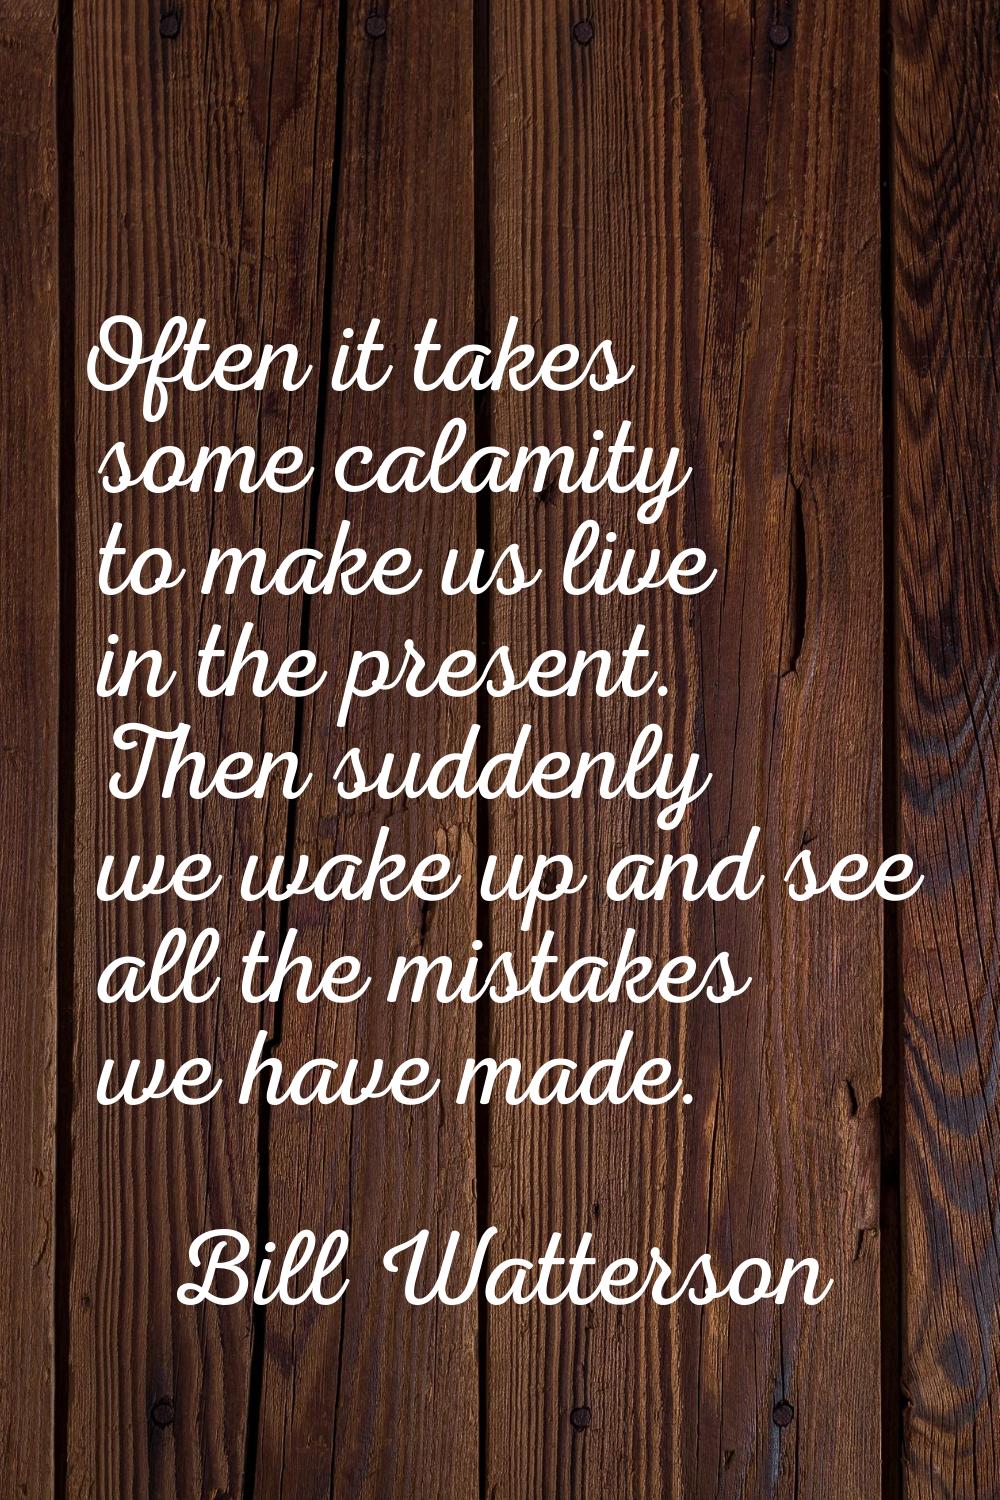 Often it takes some calamity to make us live in the present. Then suddenly we wake up and see all t